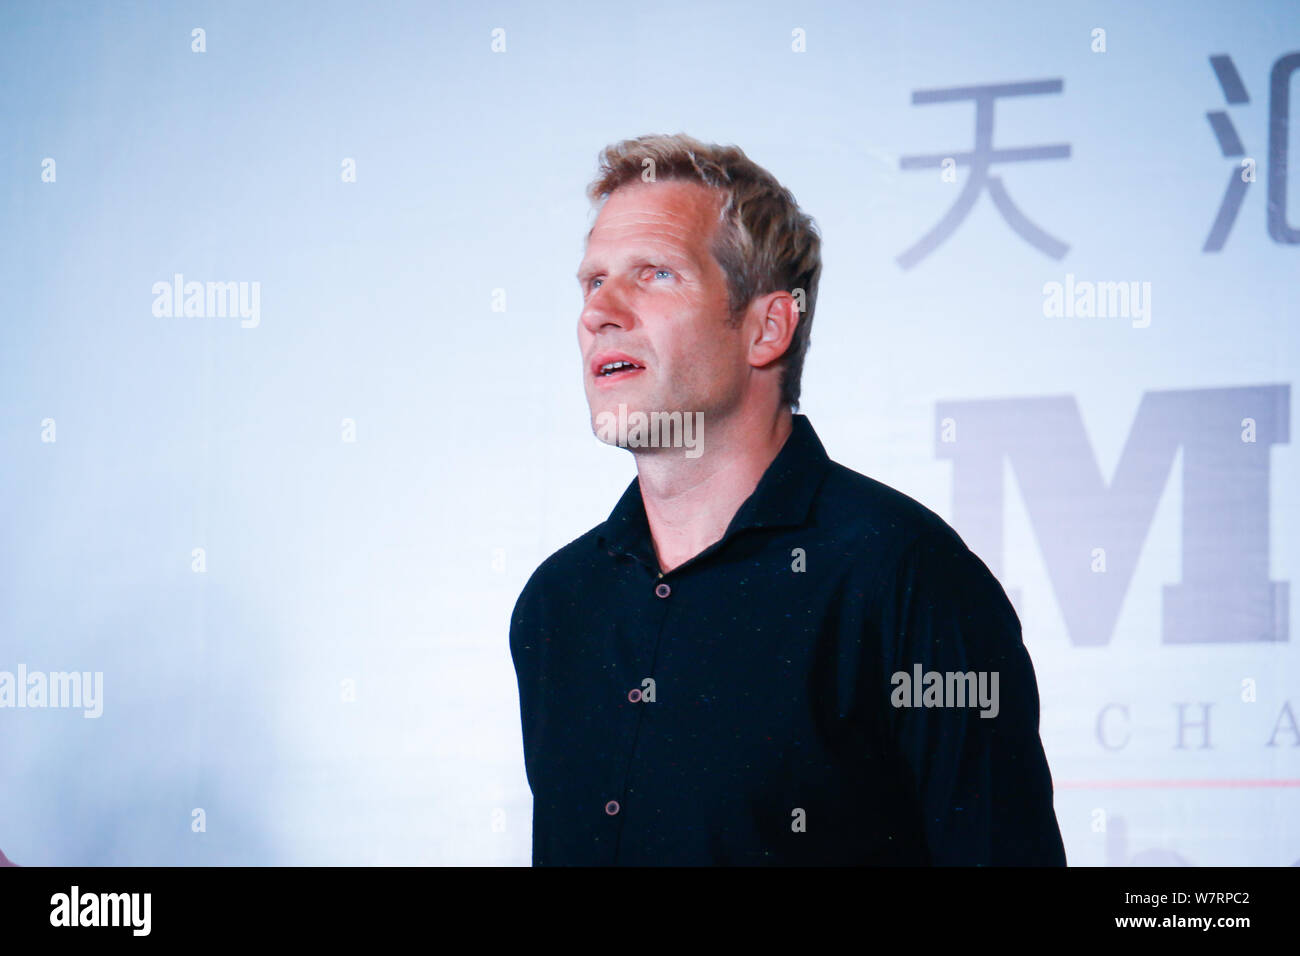 Jascha Richter of Danish rock band Michael Learns to Rock (MLTR) attends a press conference to promote their China concert tour in Guangzhou city, sou Stock Photo